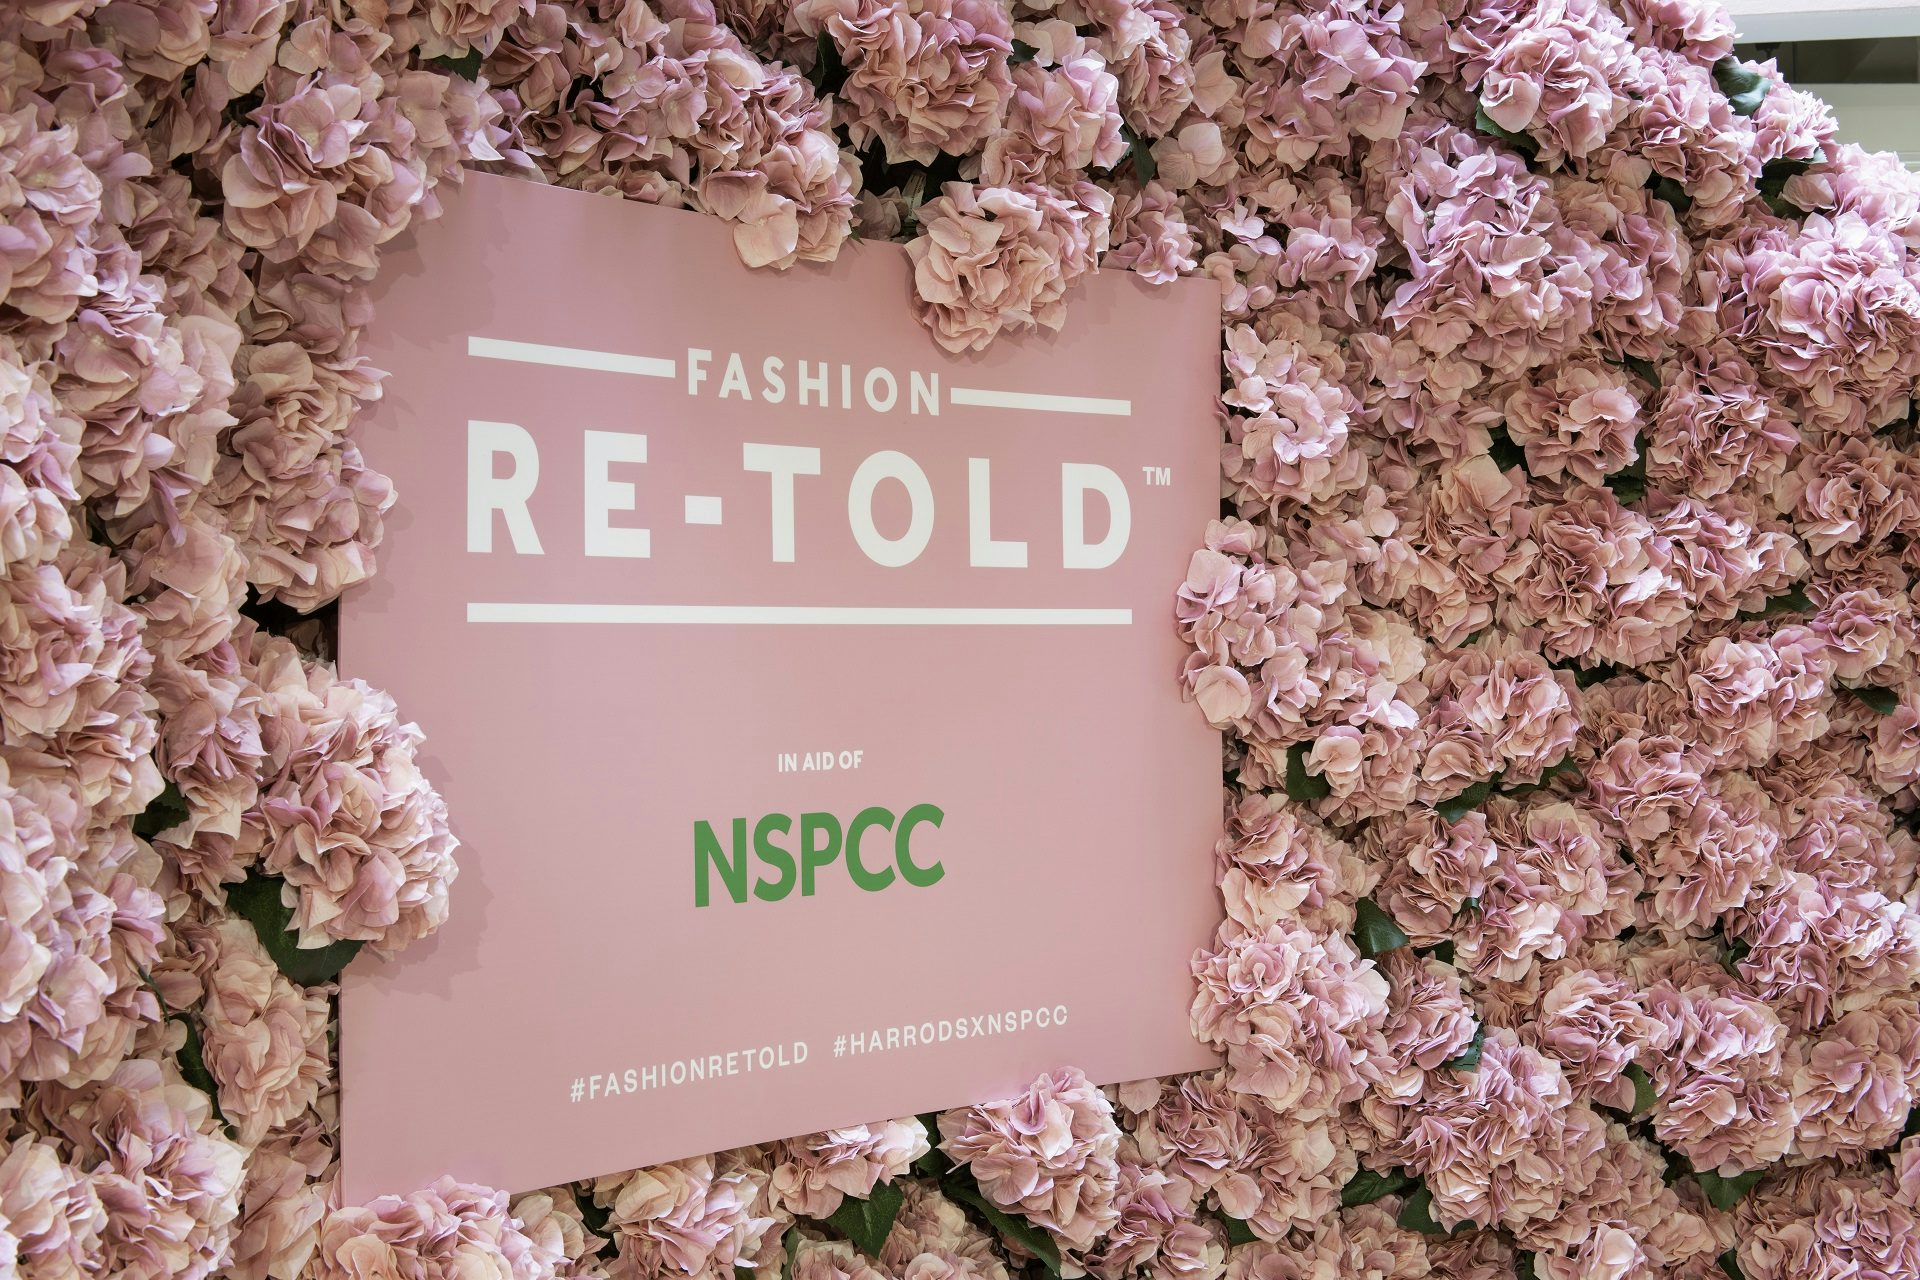 Harrods launches pop-up charity shop in aid of NSPCC